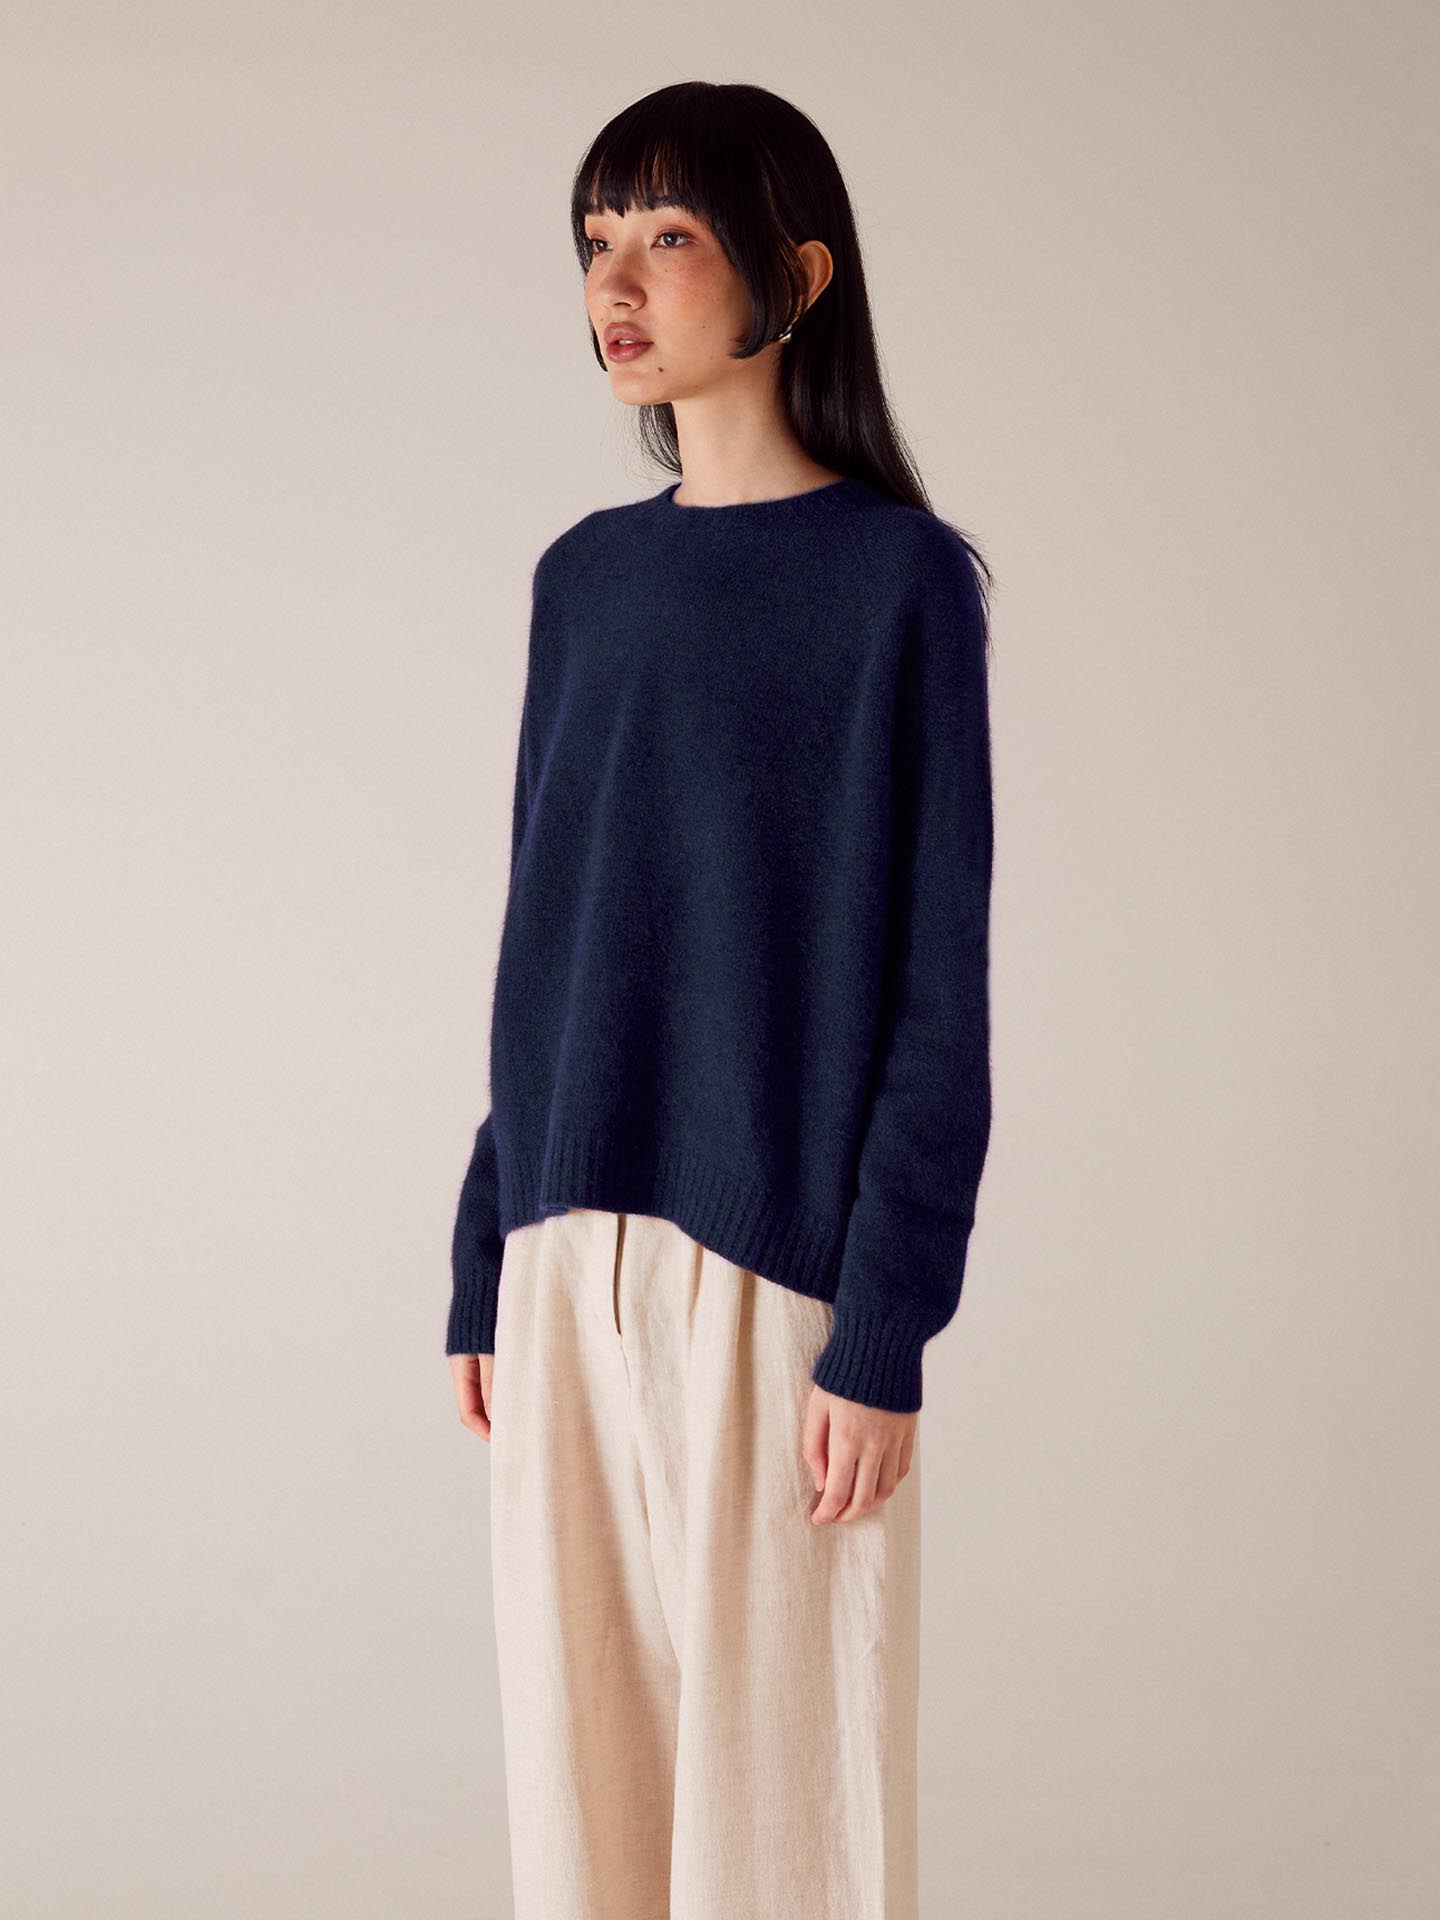 A petite woman with dark hair wearing a Francie Nimbus Raglan Knit – Midnight sweater and beige trousers standing against a light beige background.